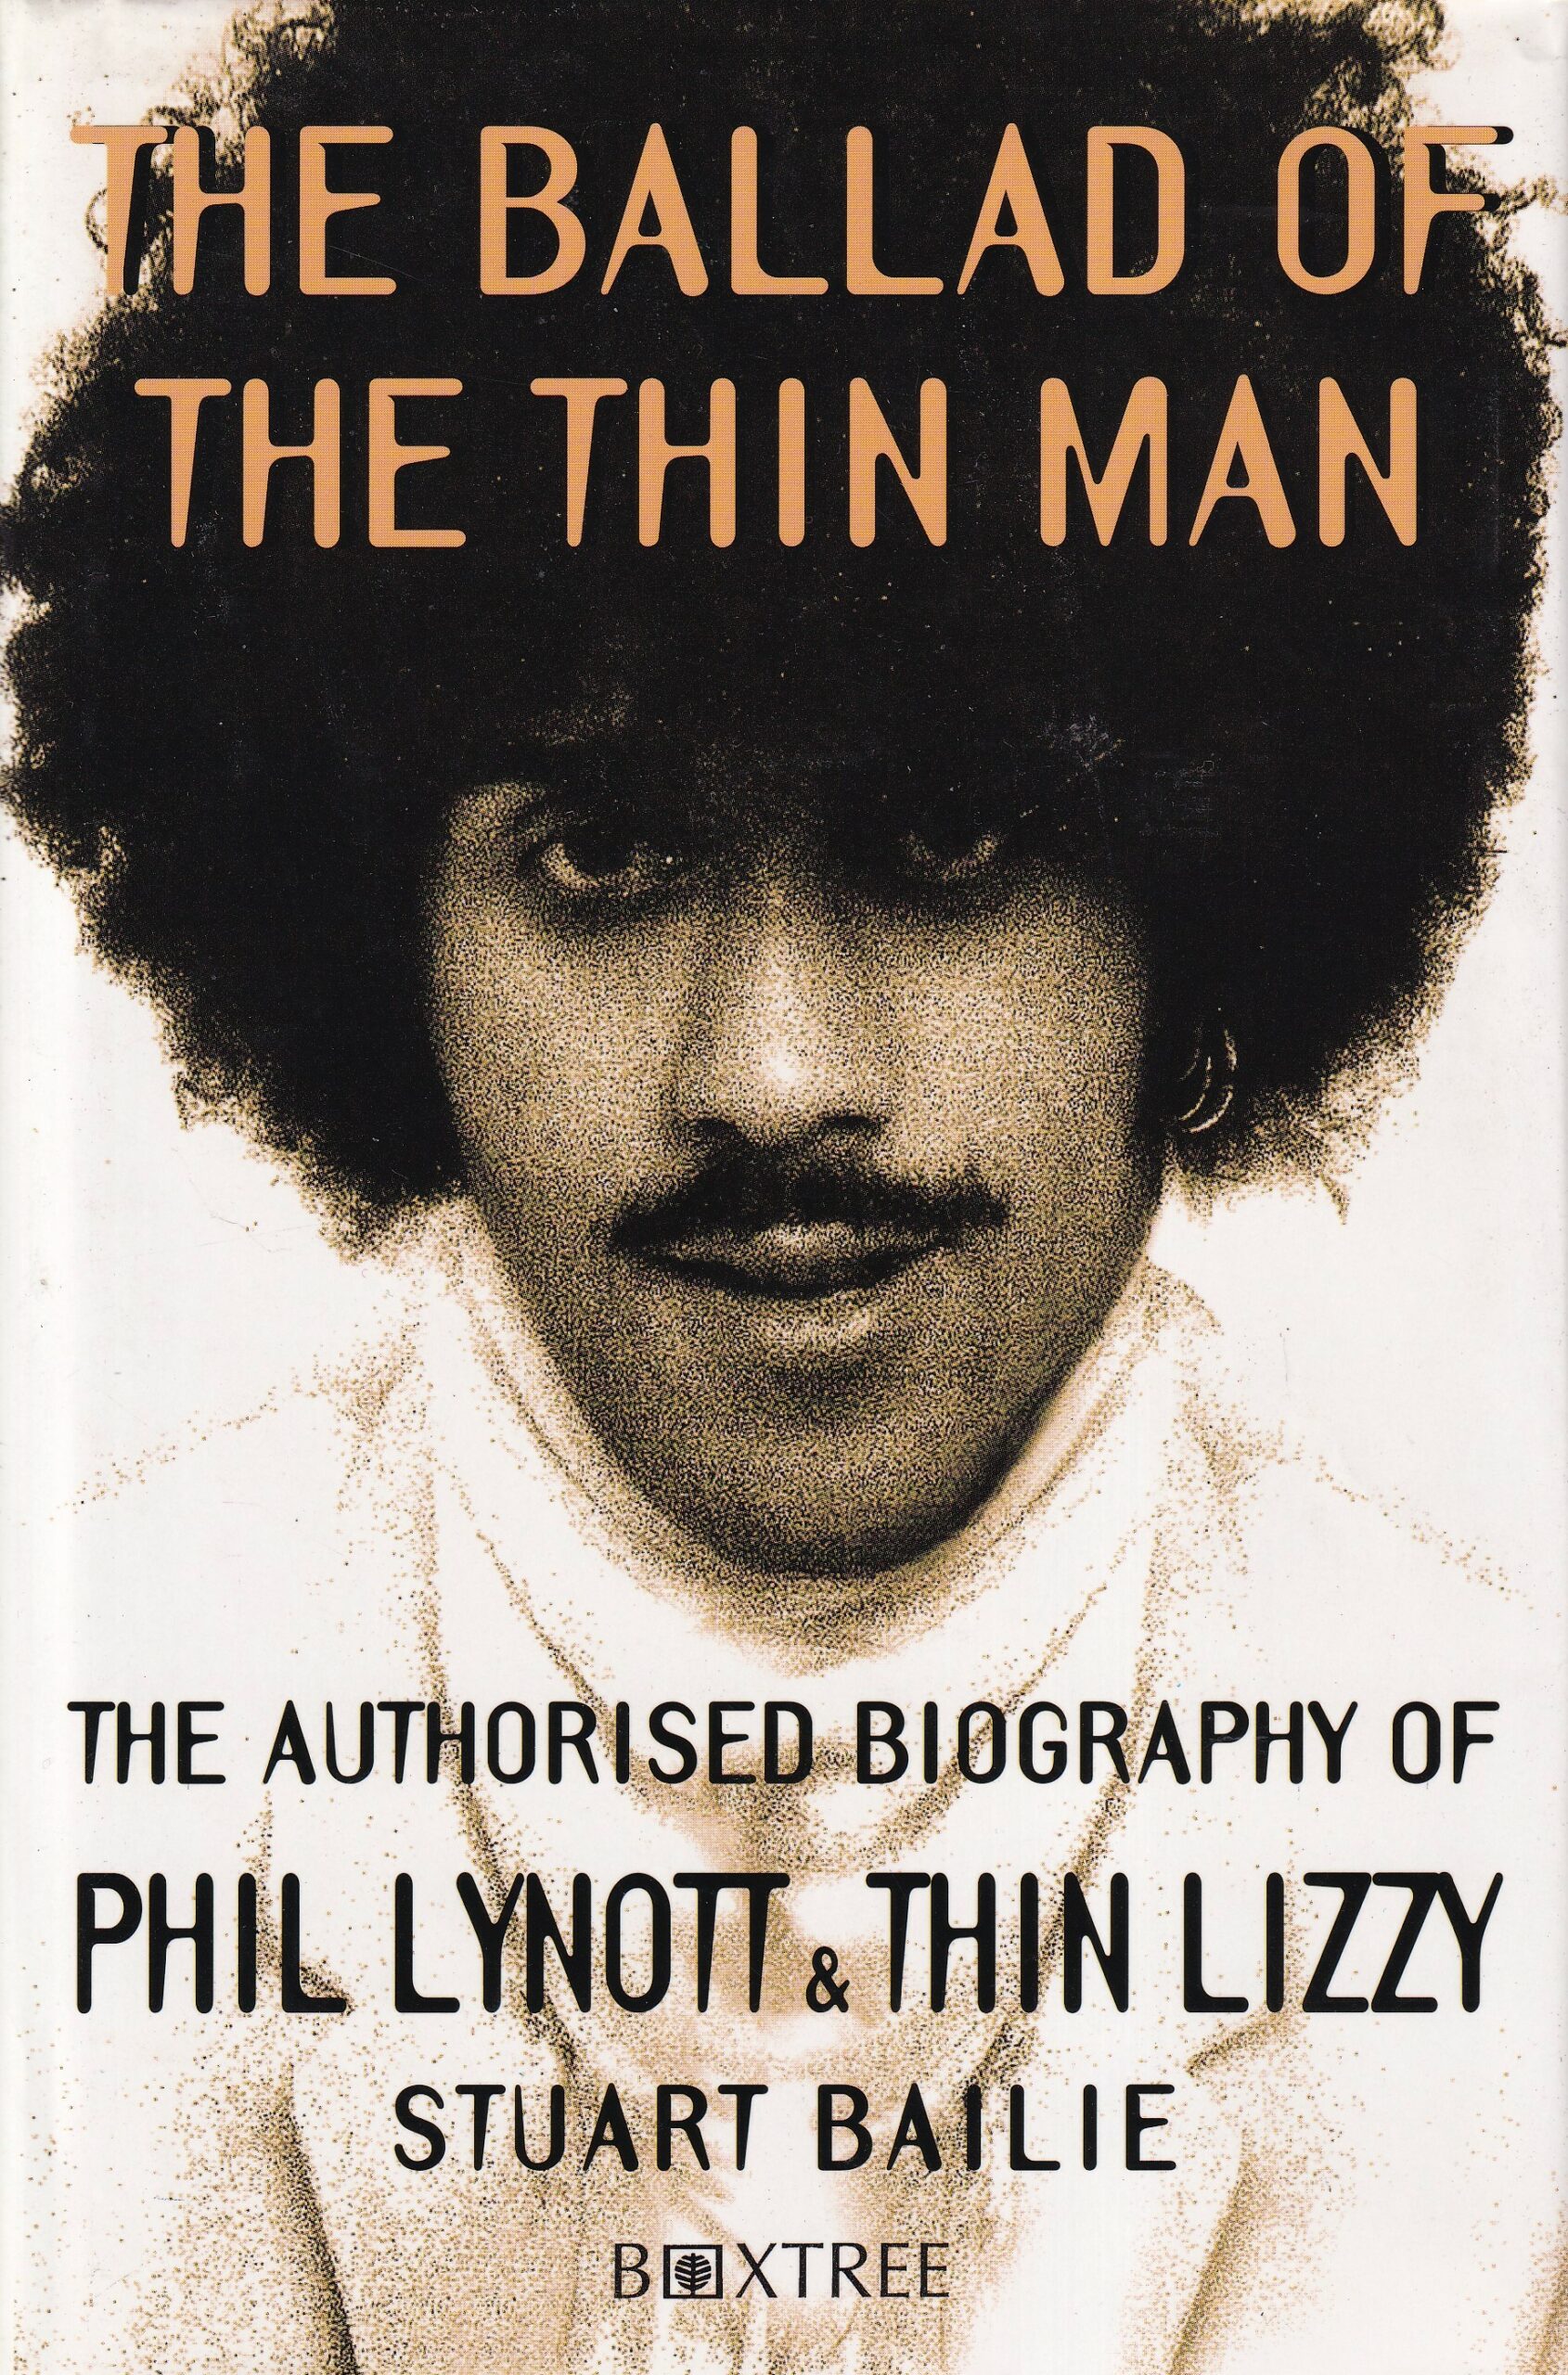 The Ballad of the Thin Man: The Authorised Biography of Phil Lynott and Thin Lizzy | Stuart Baile | Charlie Byrne's